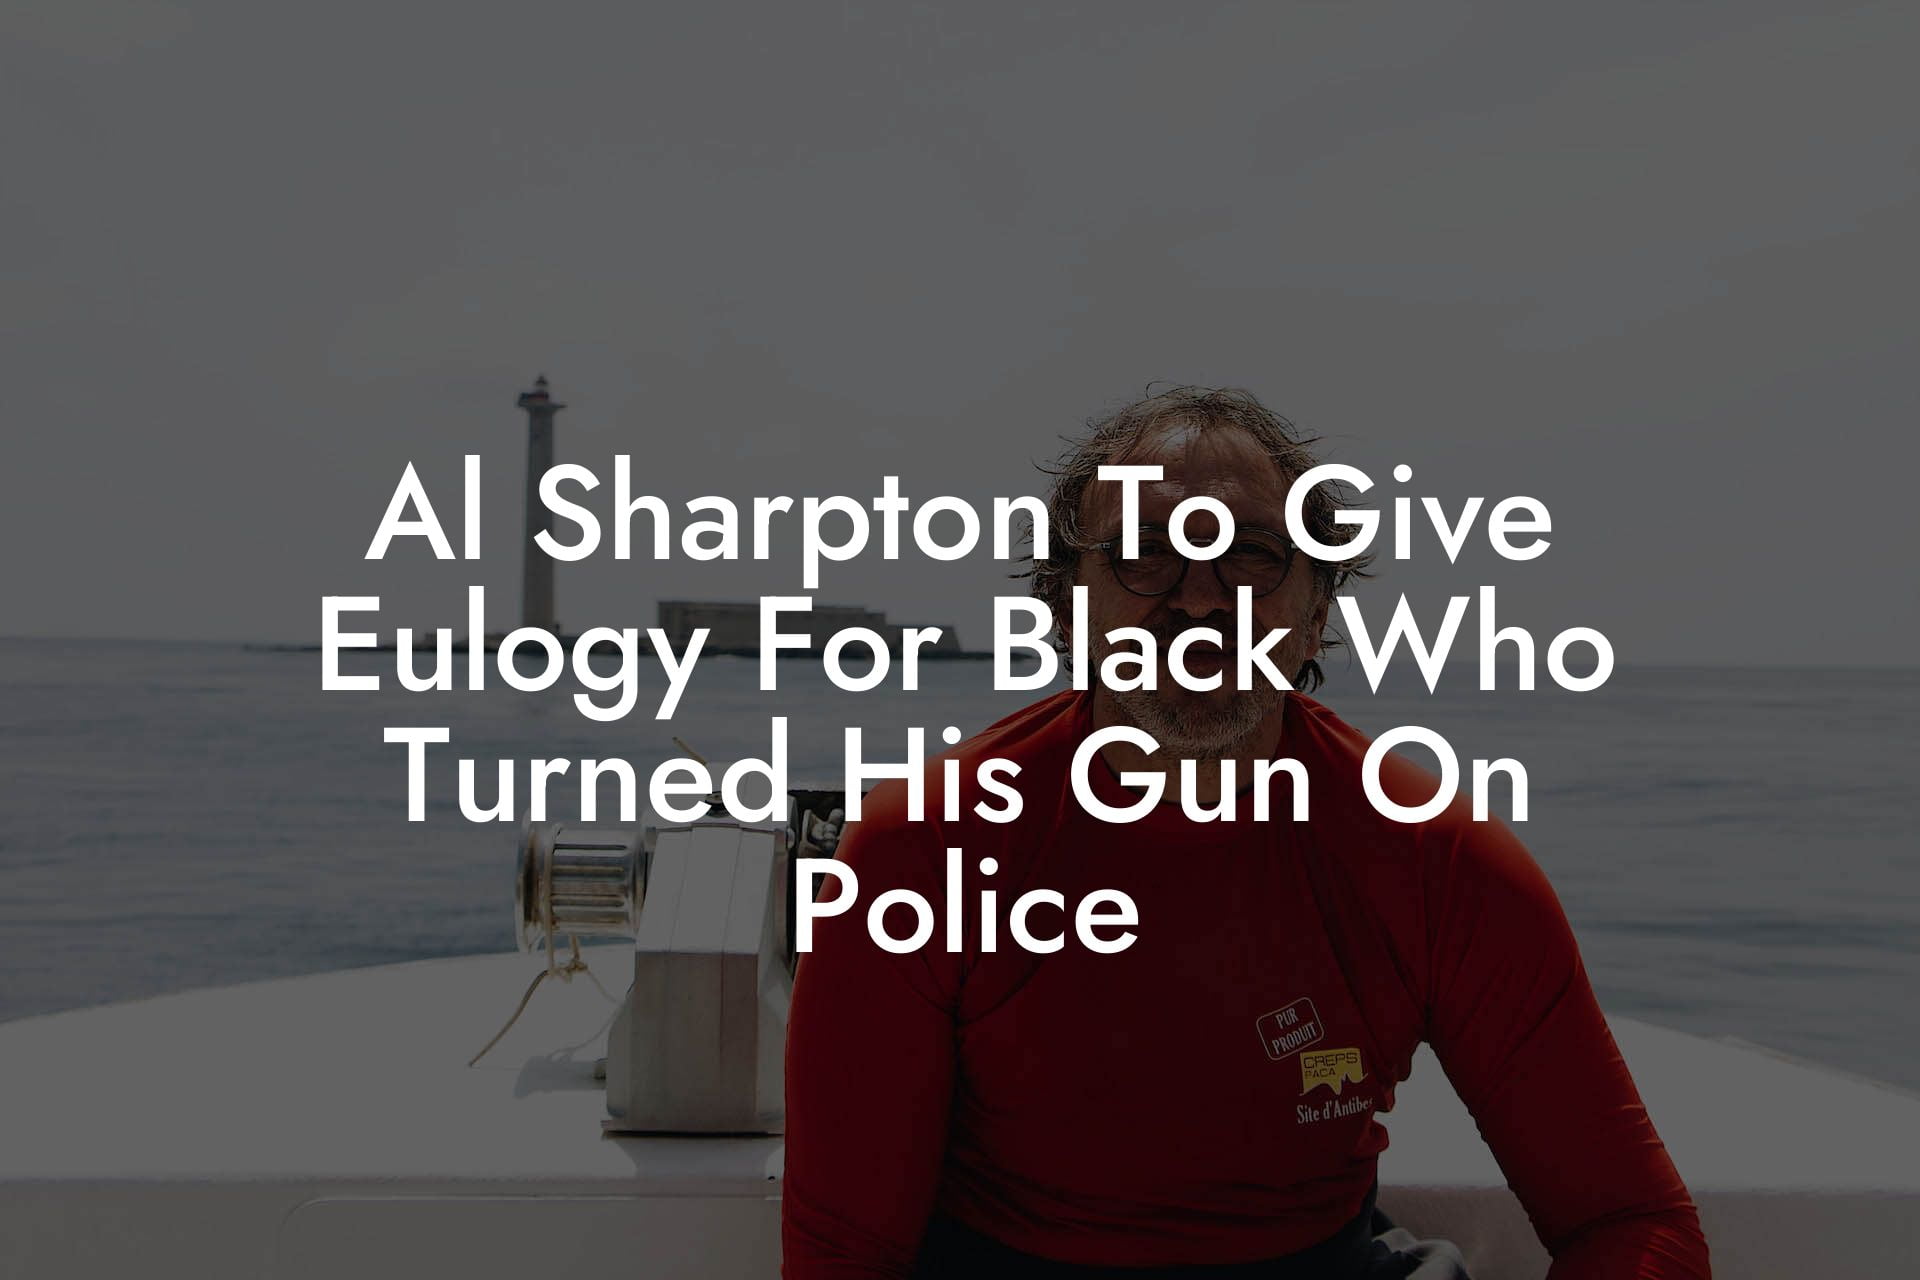 Al Sharpton To Give Eulogy For Black Who Turned His Gun On Police